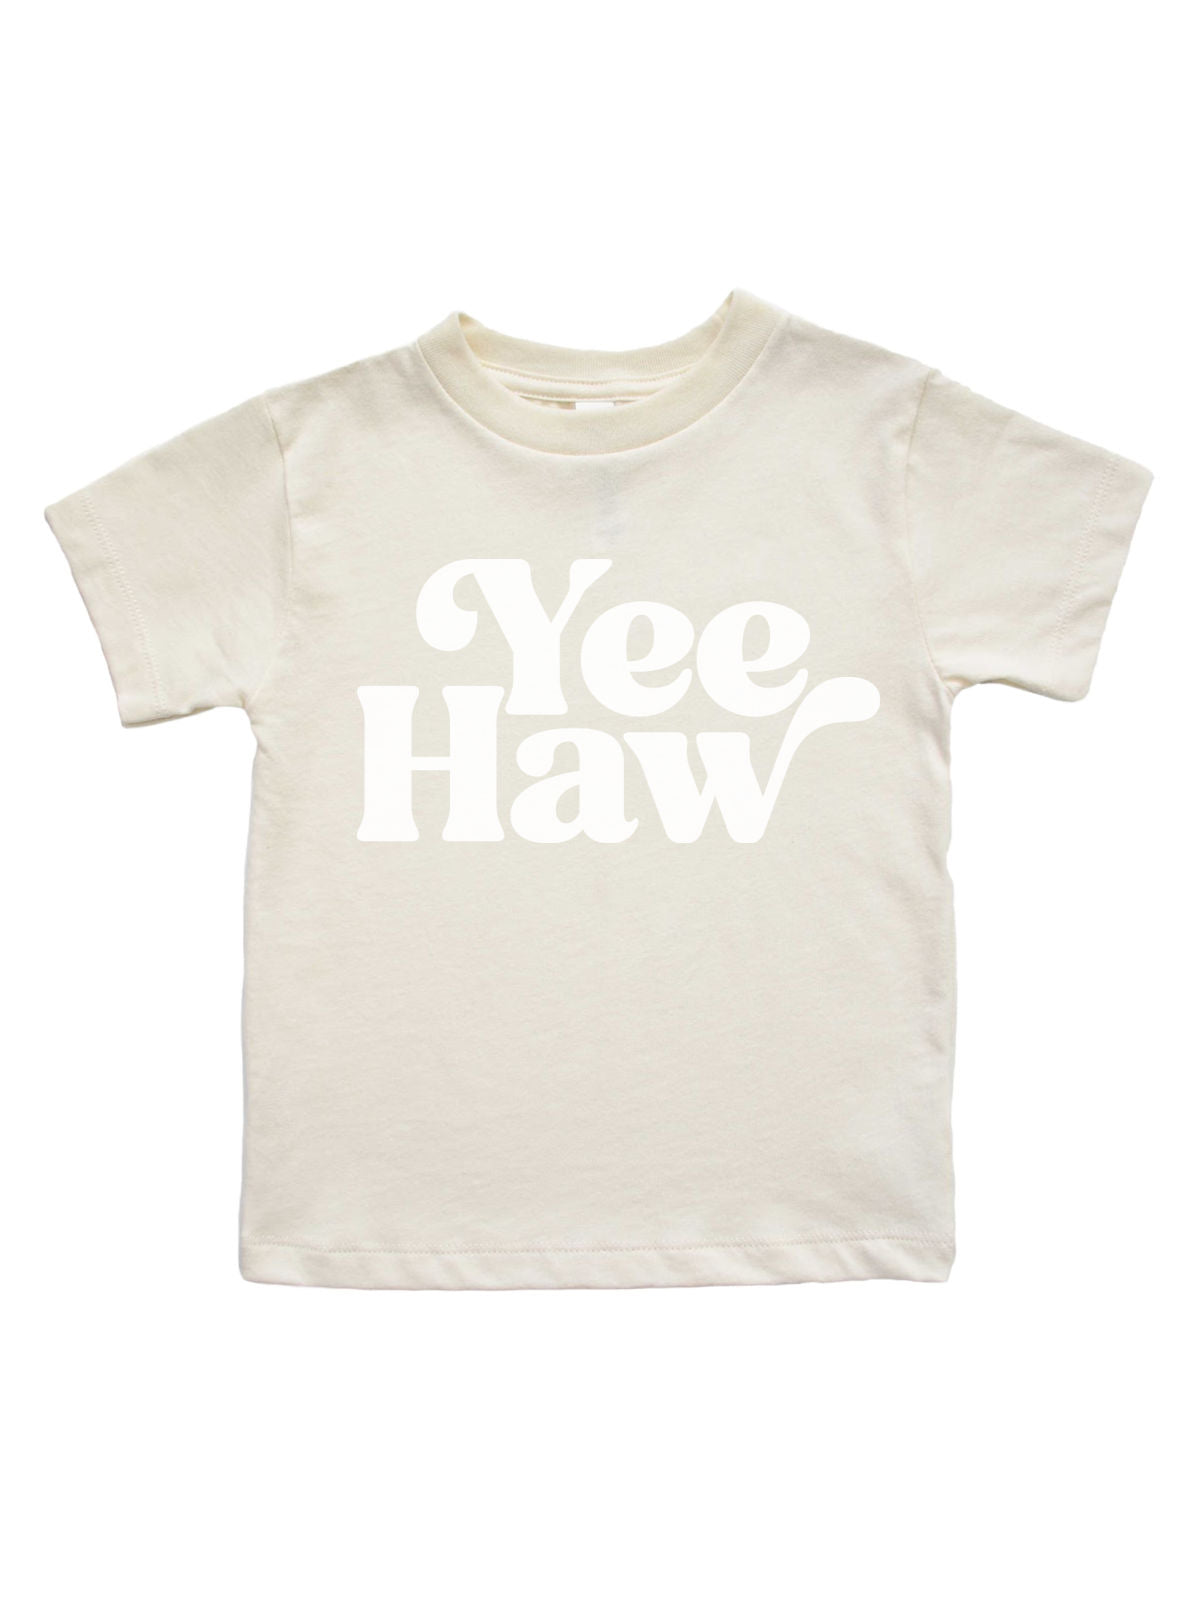 Yee Haw Kids Country Shirt in Natural